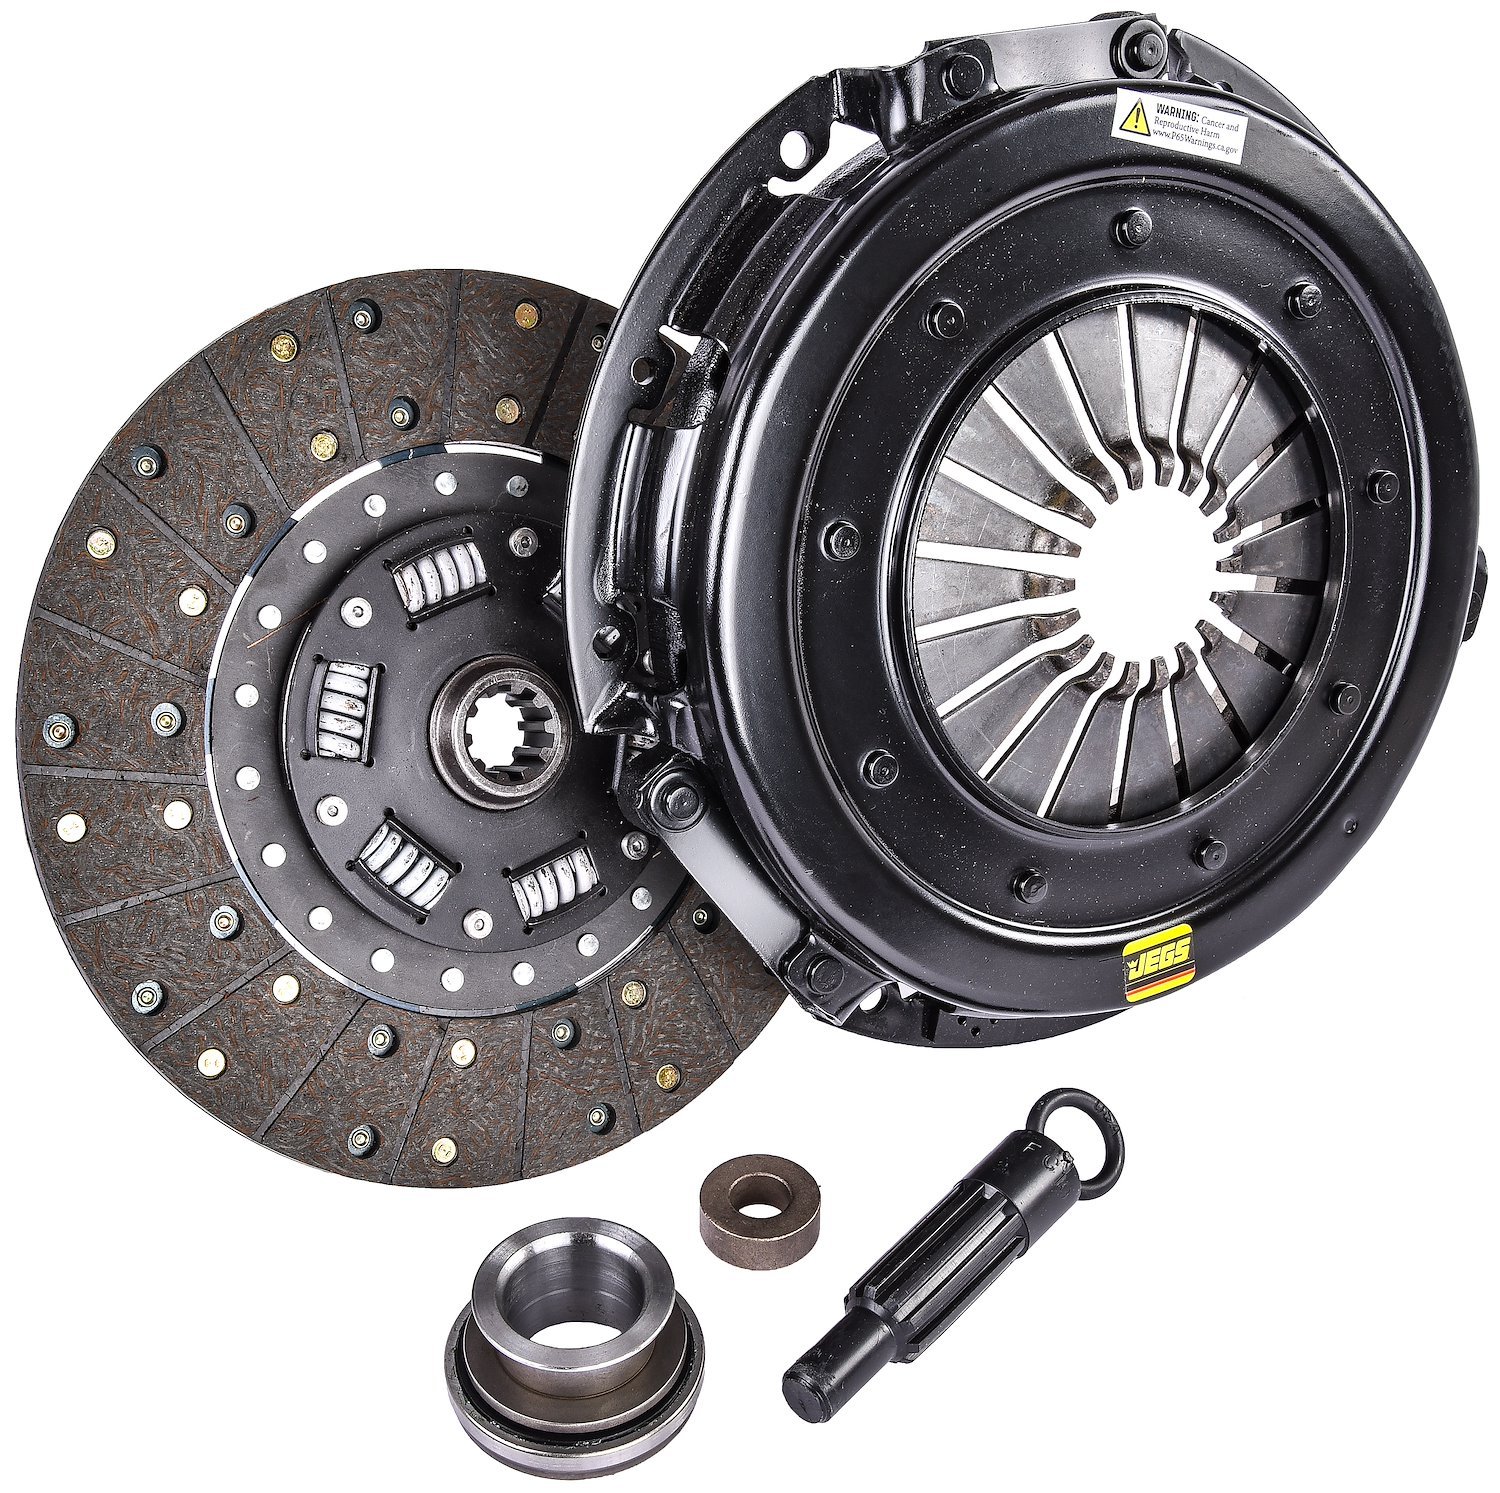 Street Performance Clutch Kit for 1986-2001 Ford Mustang with 4.6L or 5.0L Engine [10.500 in. Diameter, 1 1/16 in. x 10-Spline]